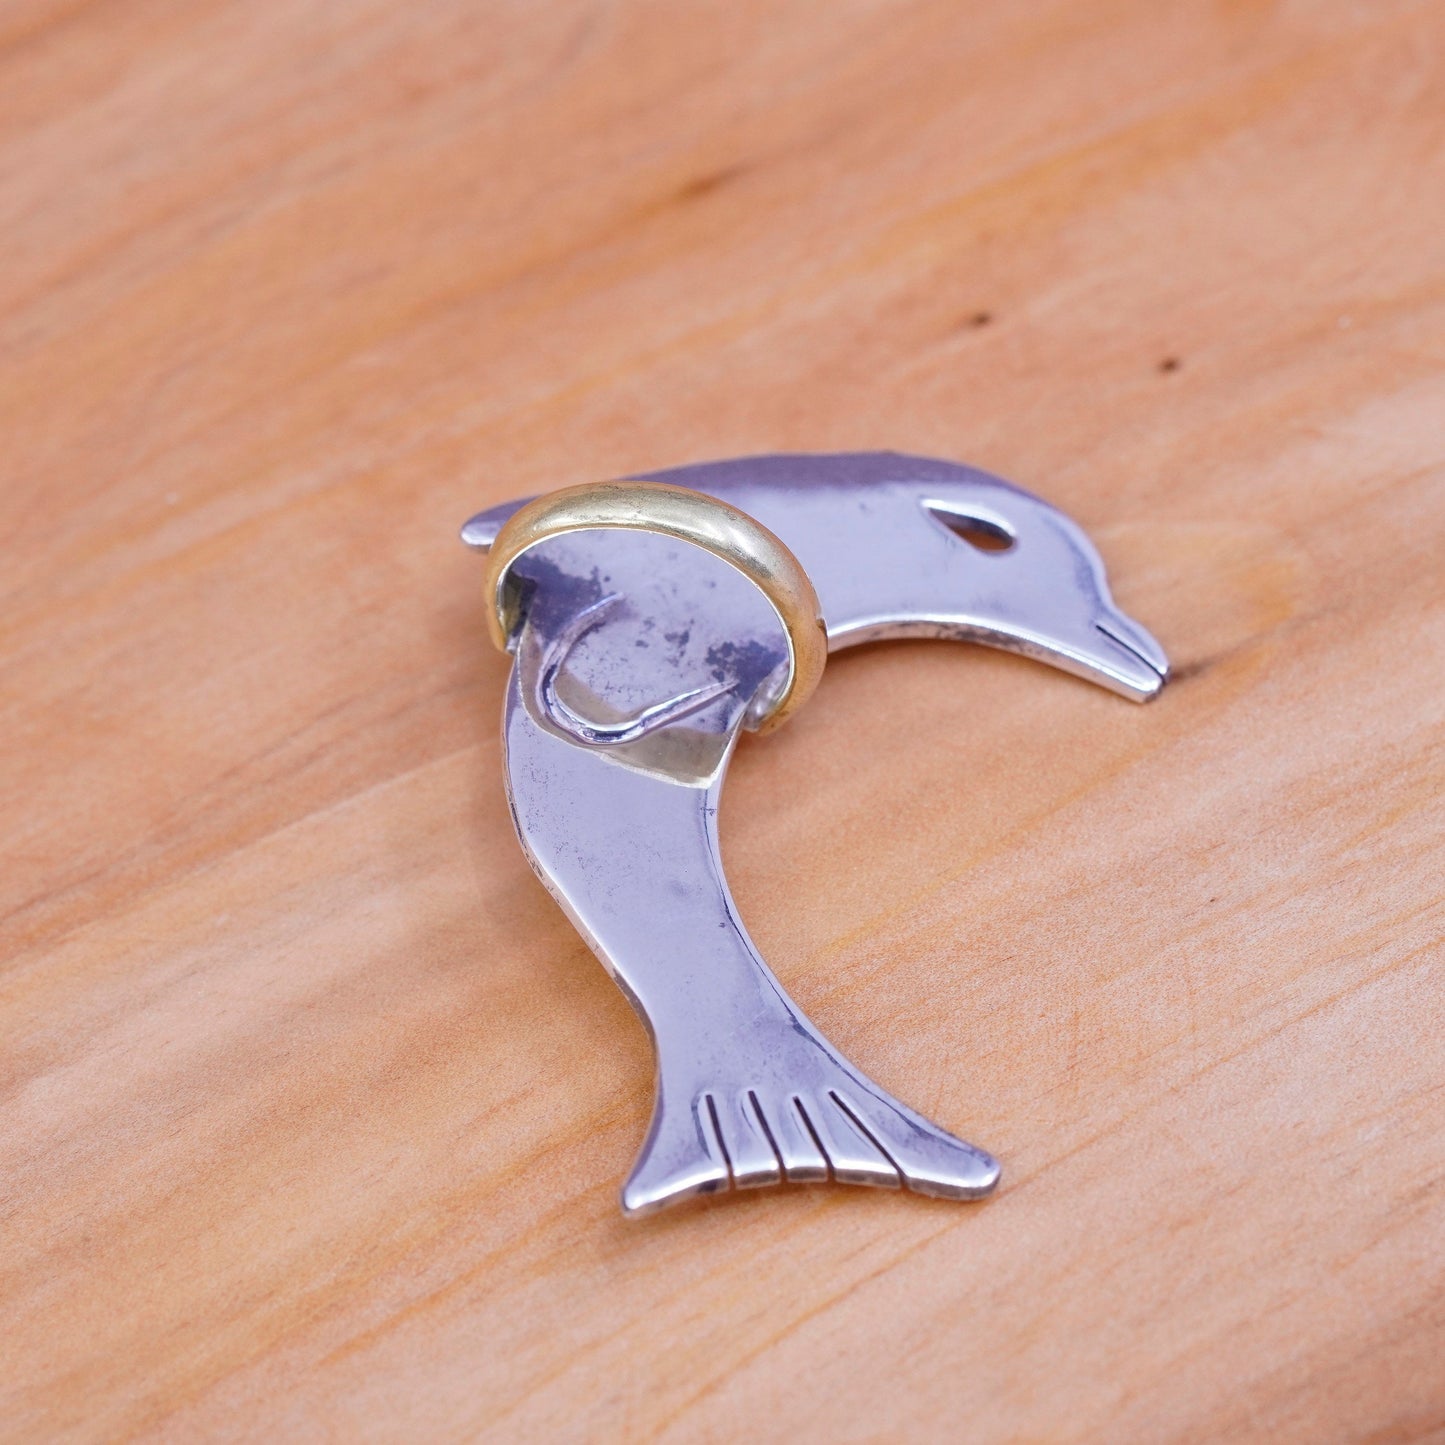 Vintage handmade two tone sterling 925 silver dolphin brooch with brass trim